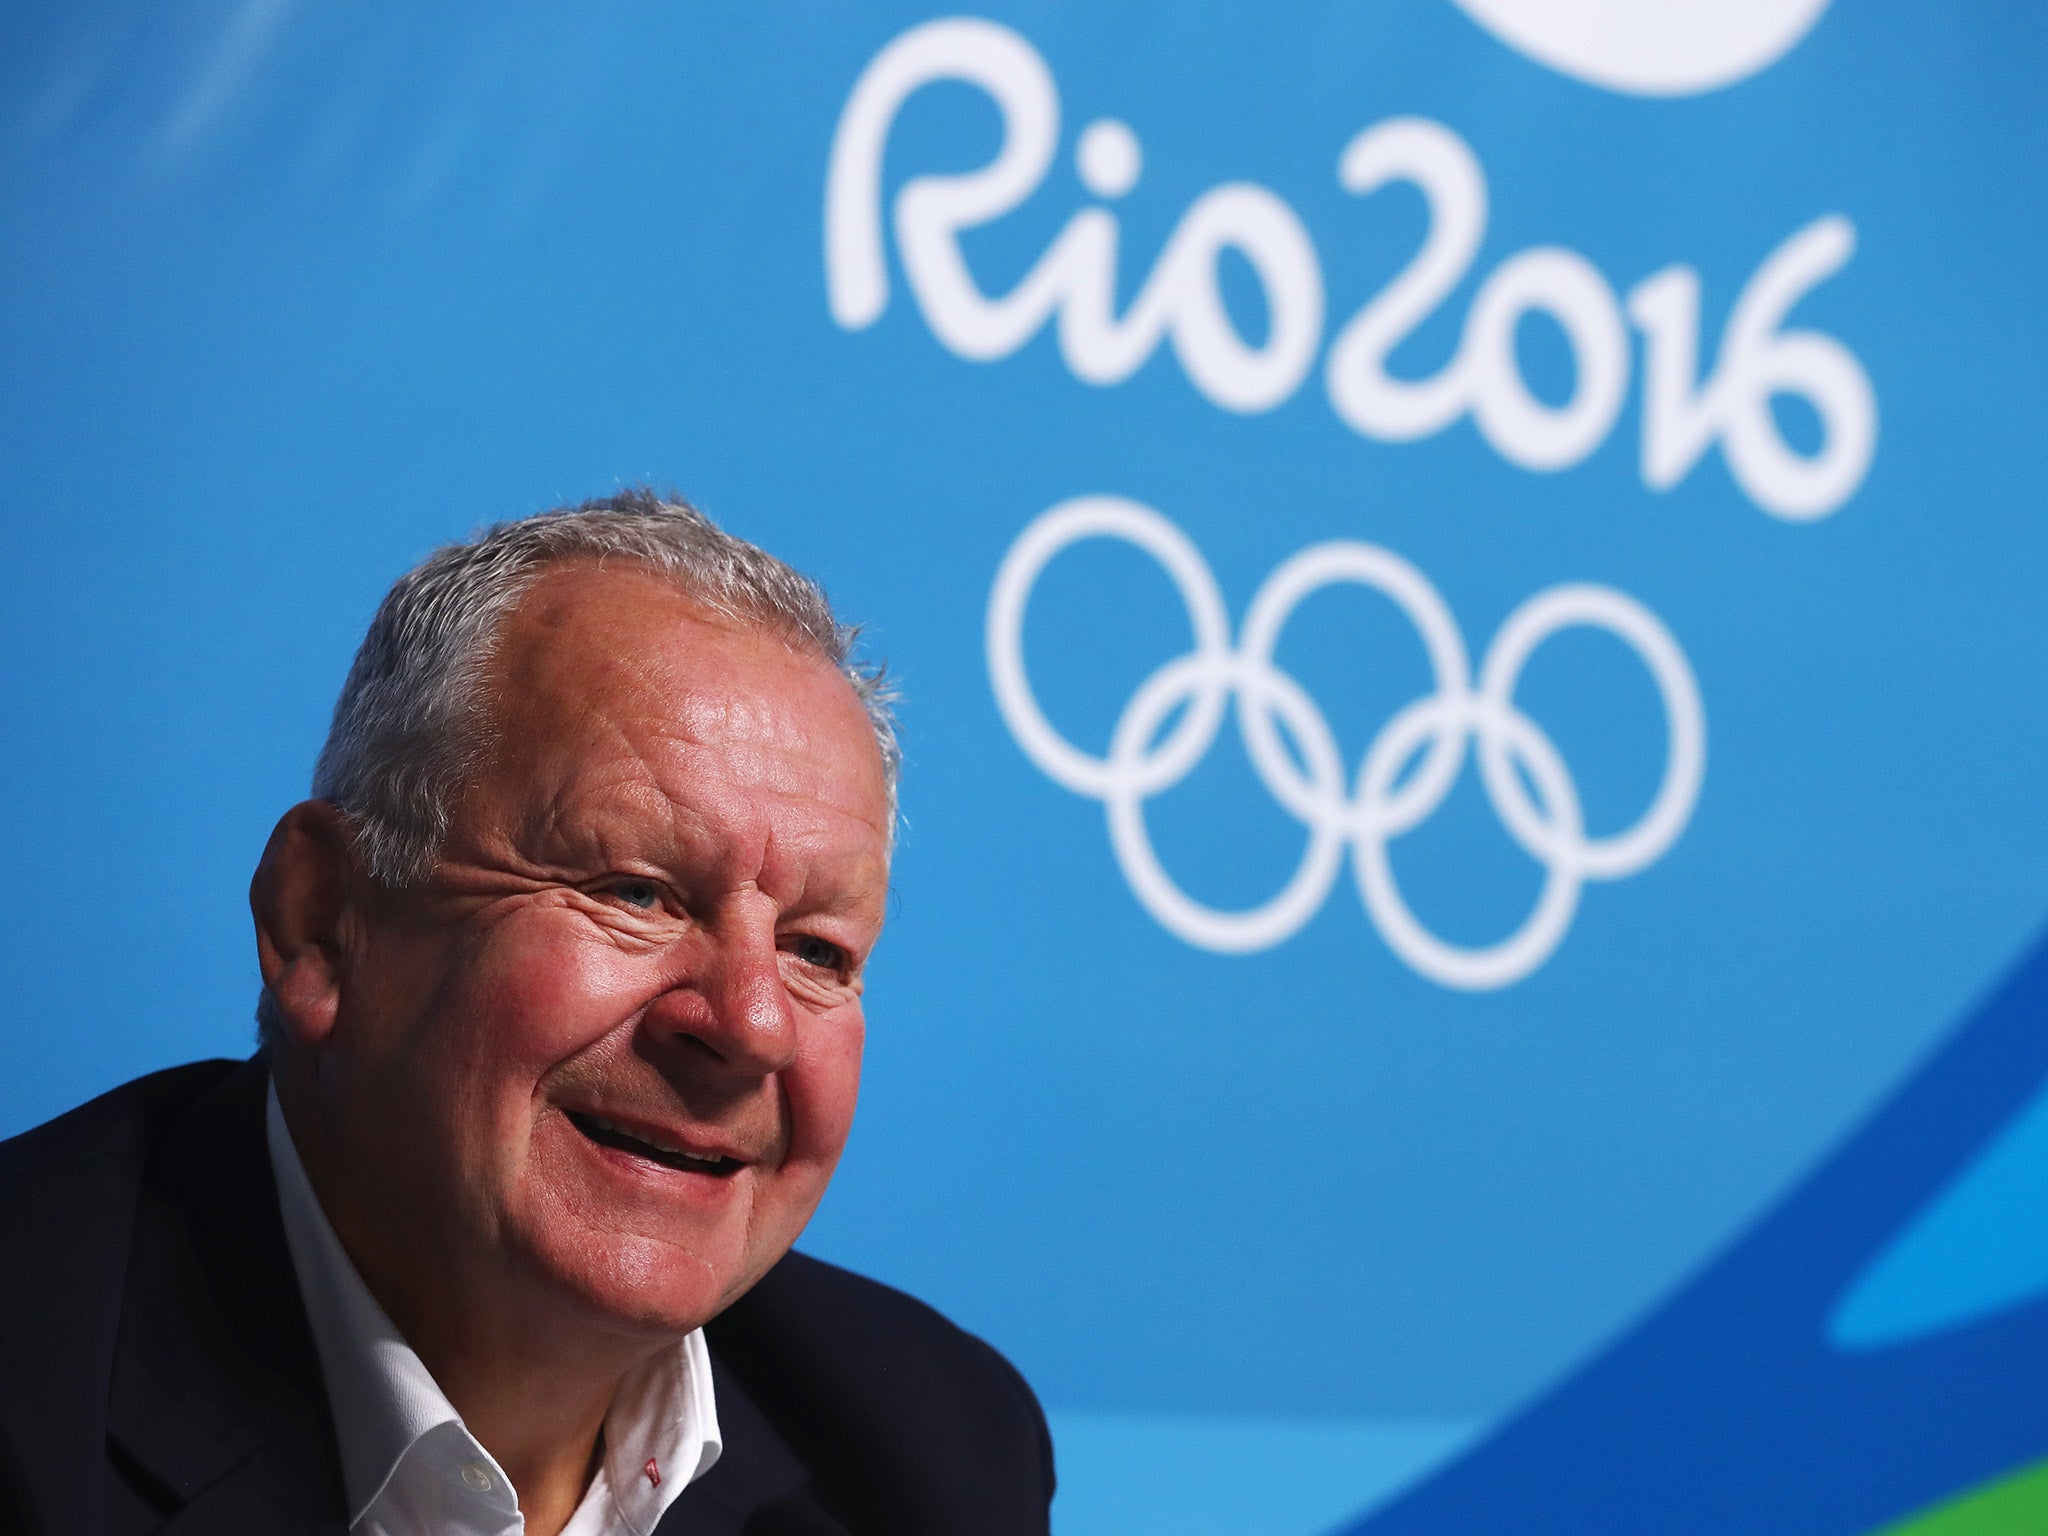 World Rugby chairman Bill Beaumont believes Rio 2016 can help grow the sport across the globe